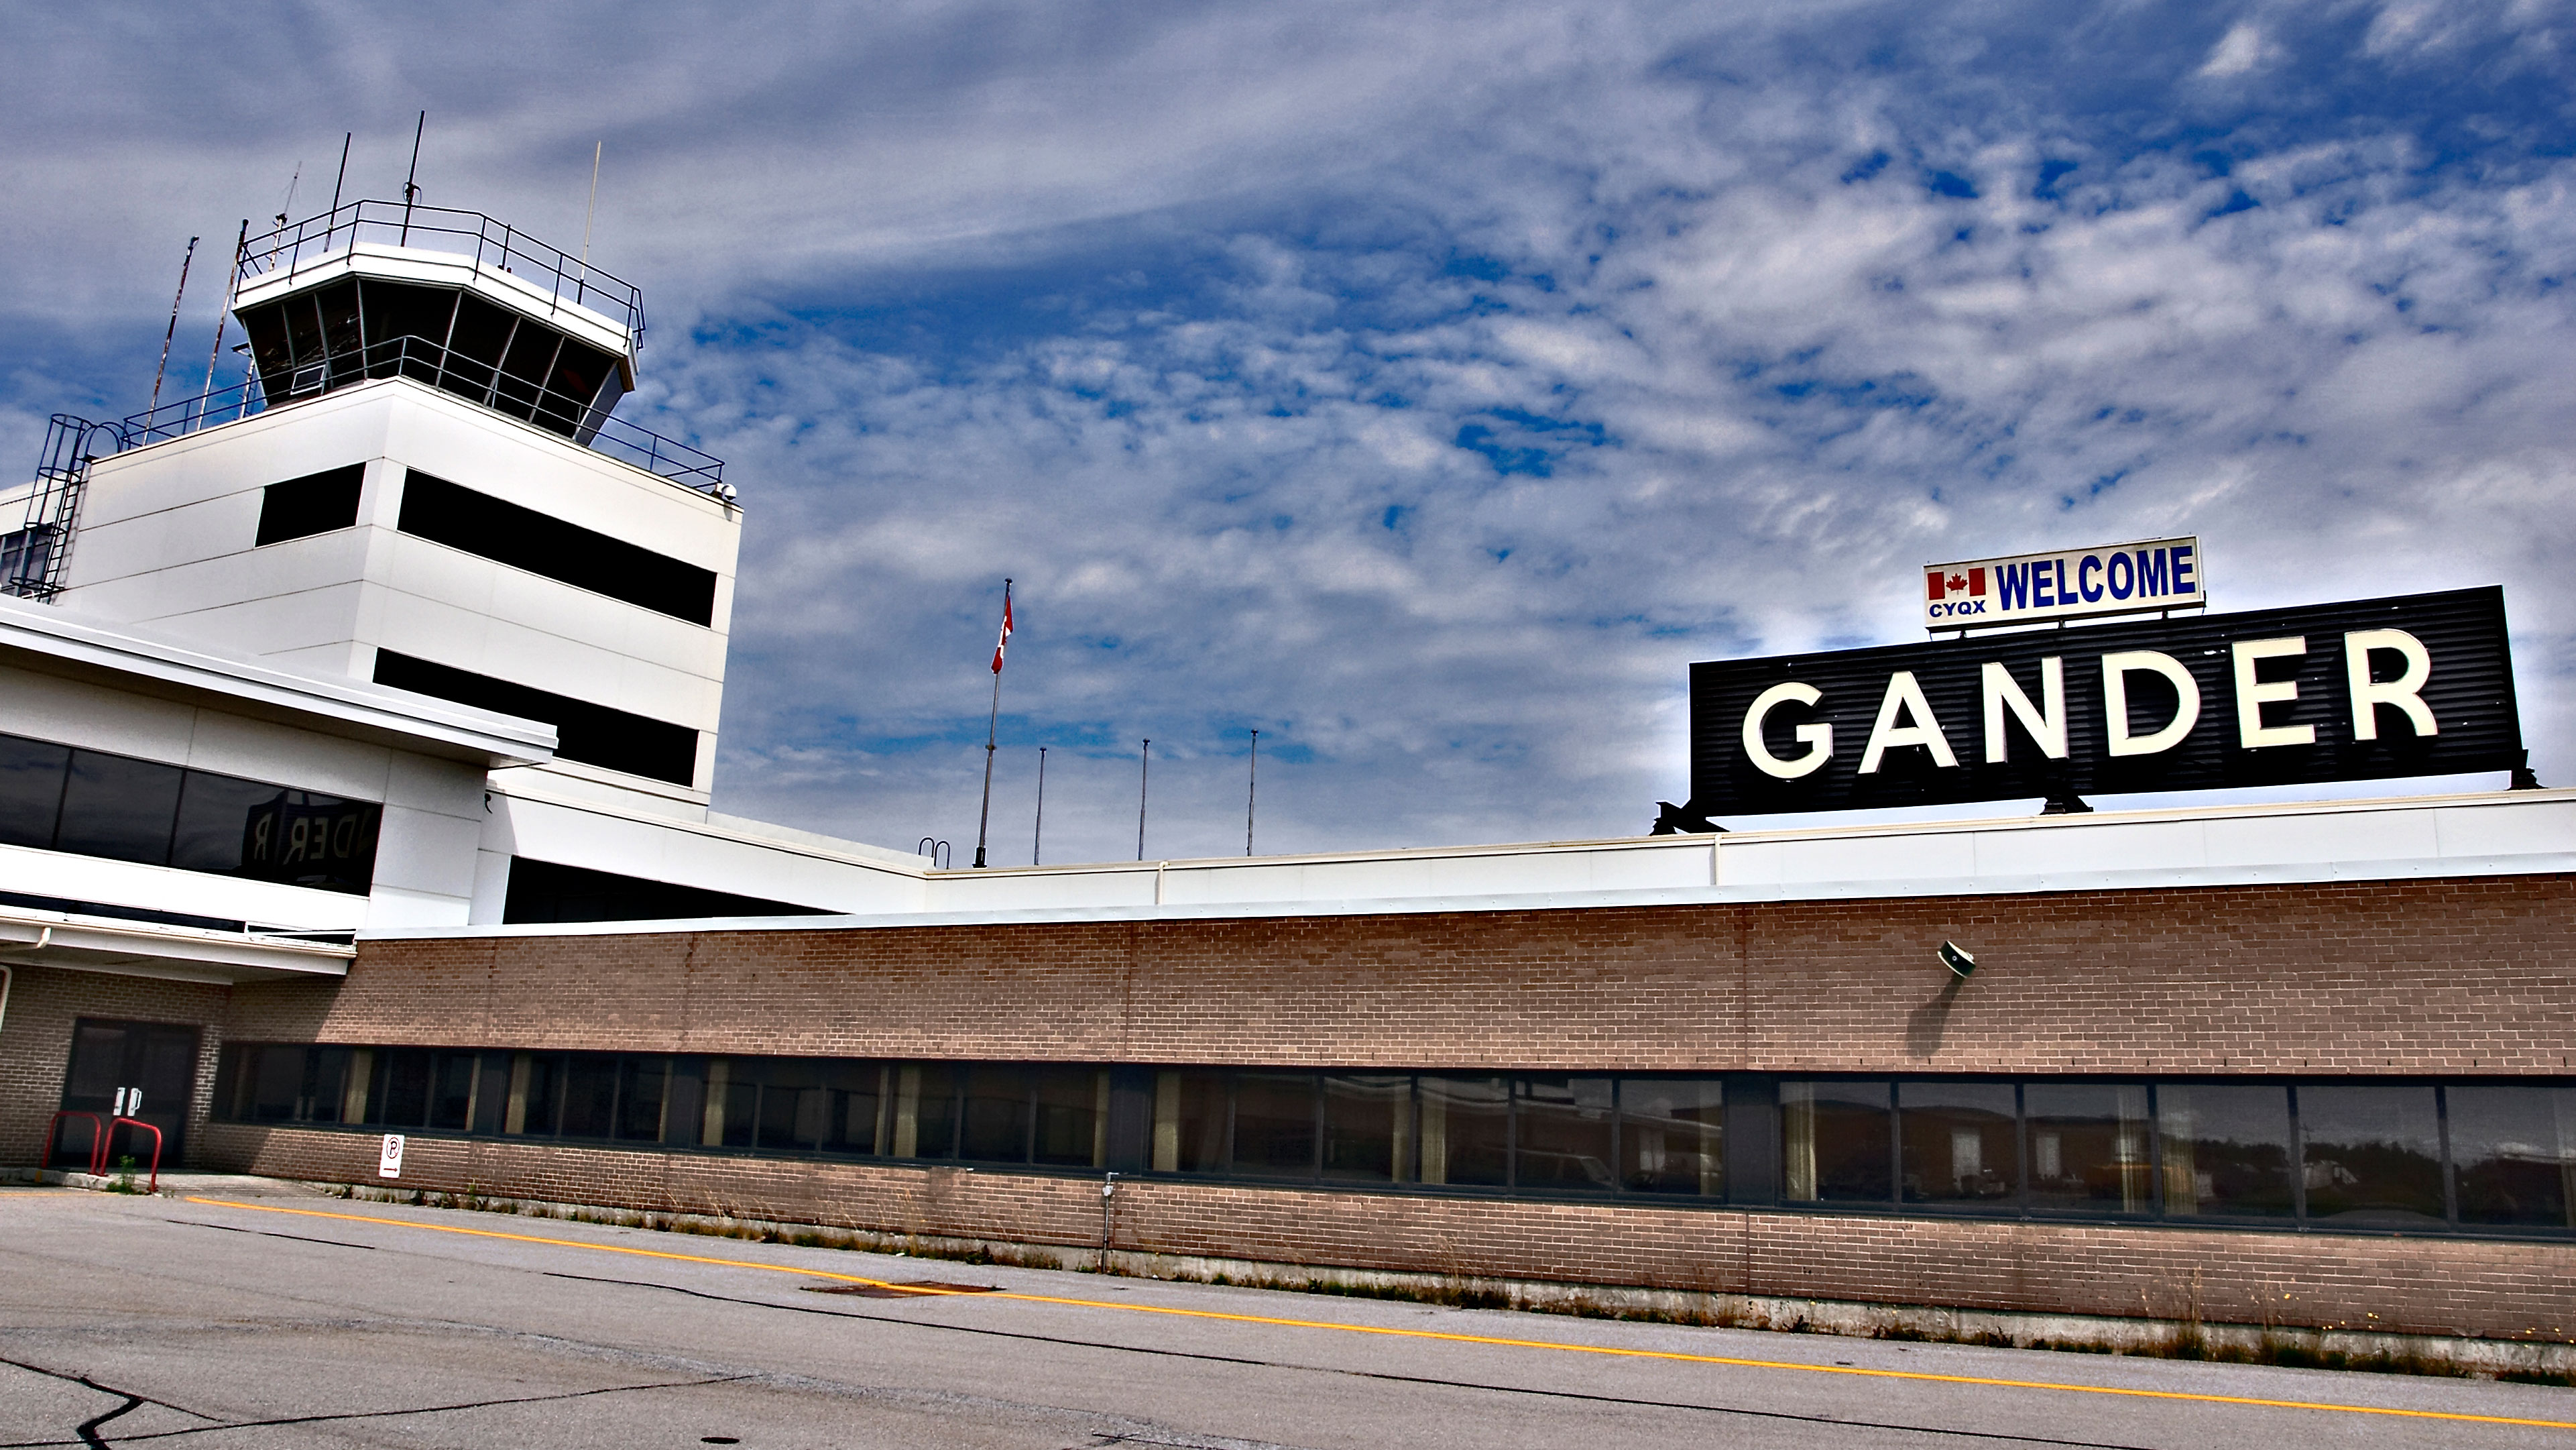 Gander Airport The Canadian Outpost That Inspired Come From Away